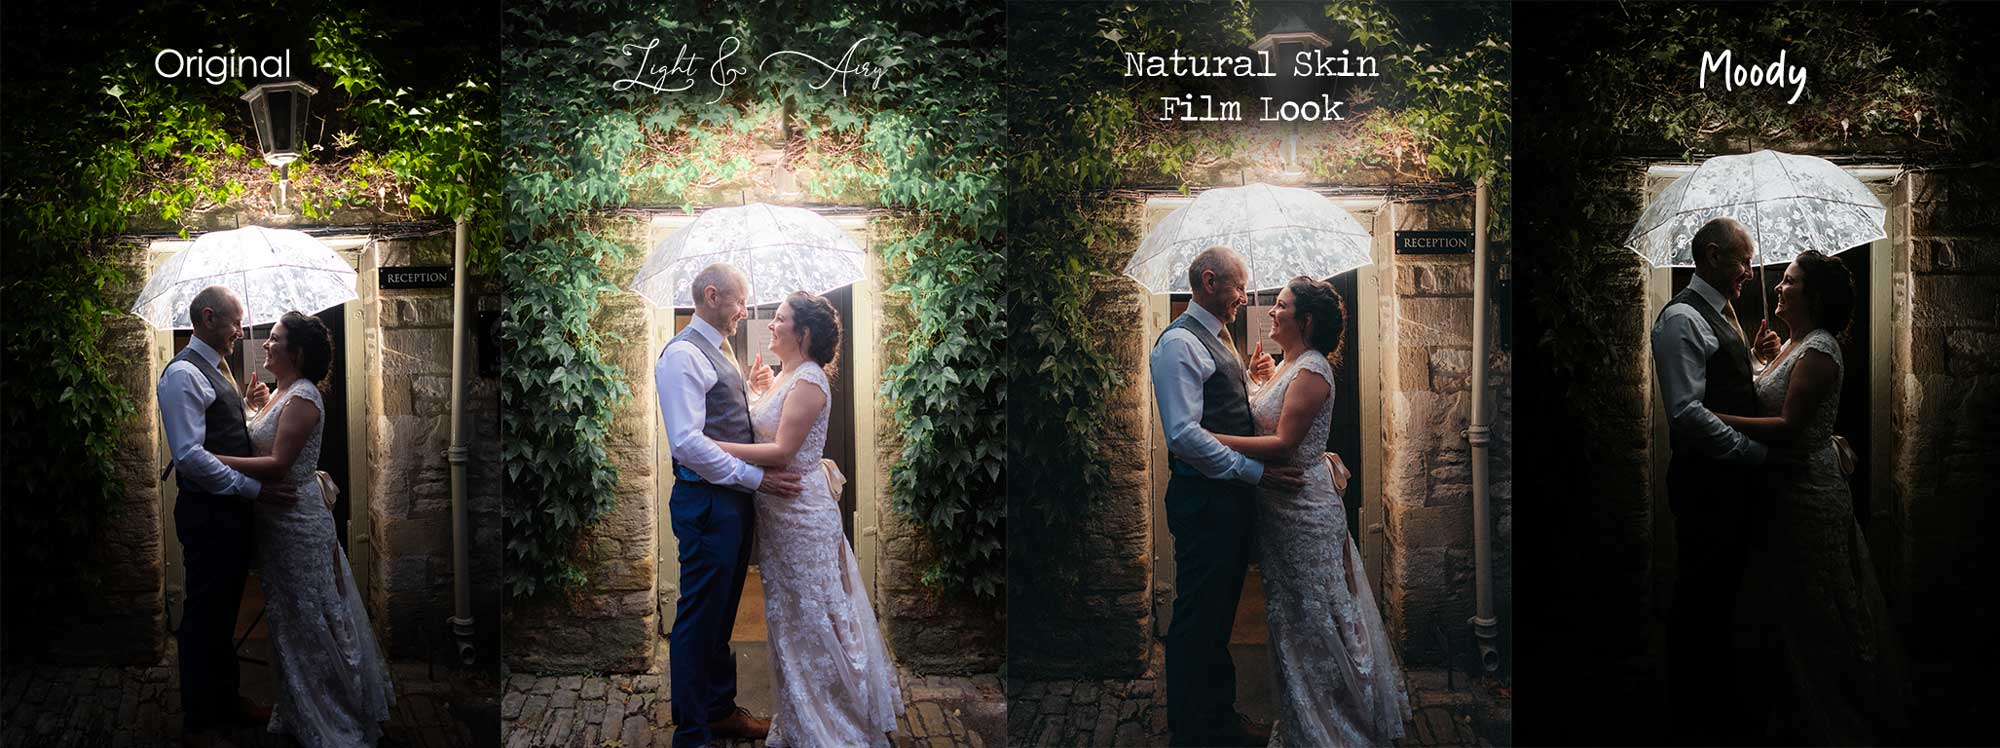 simple explanation of different wedding photography styles